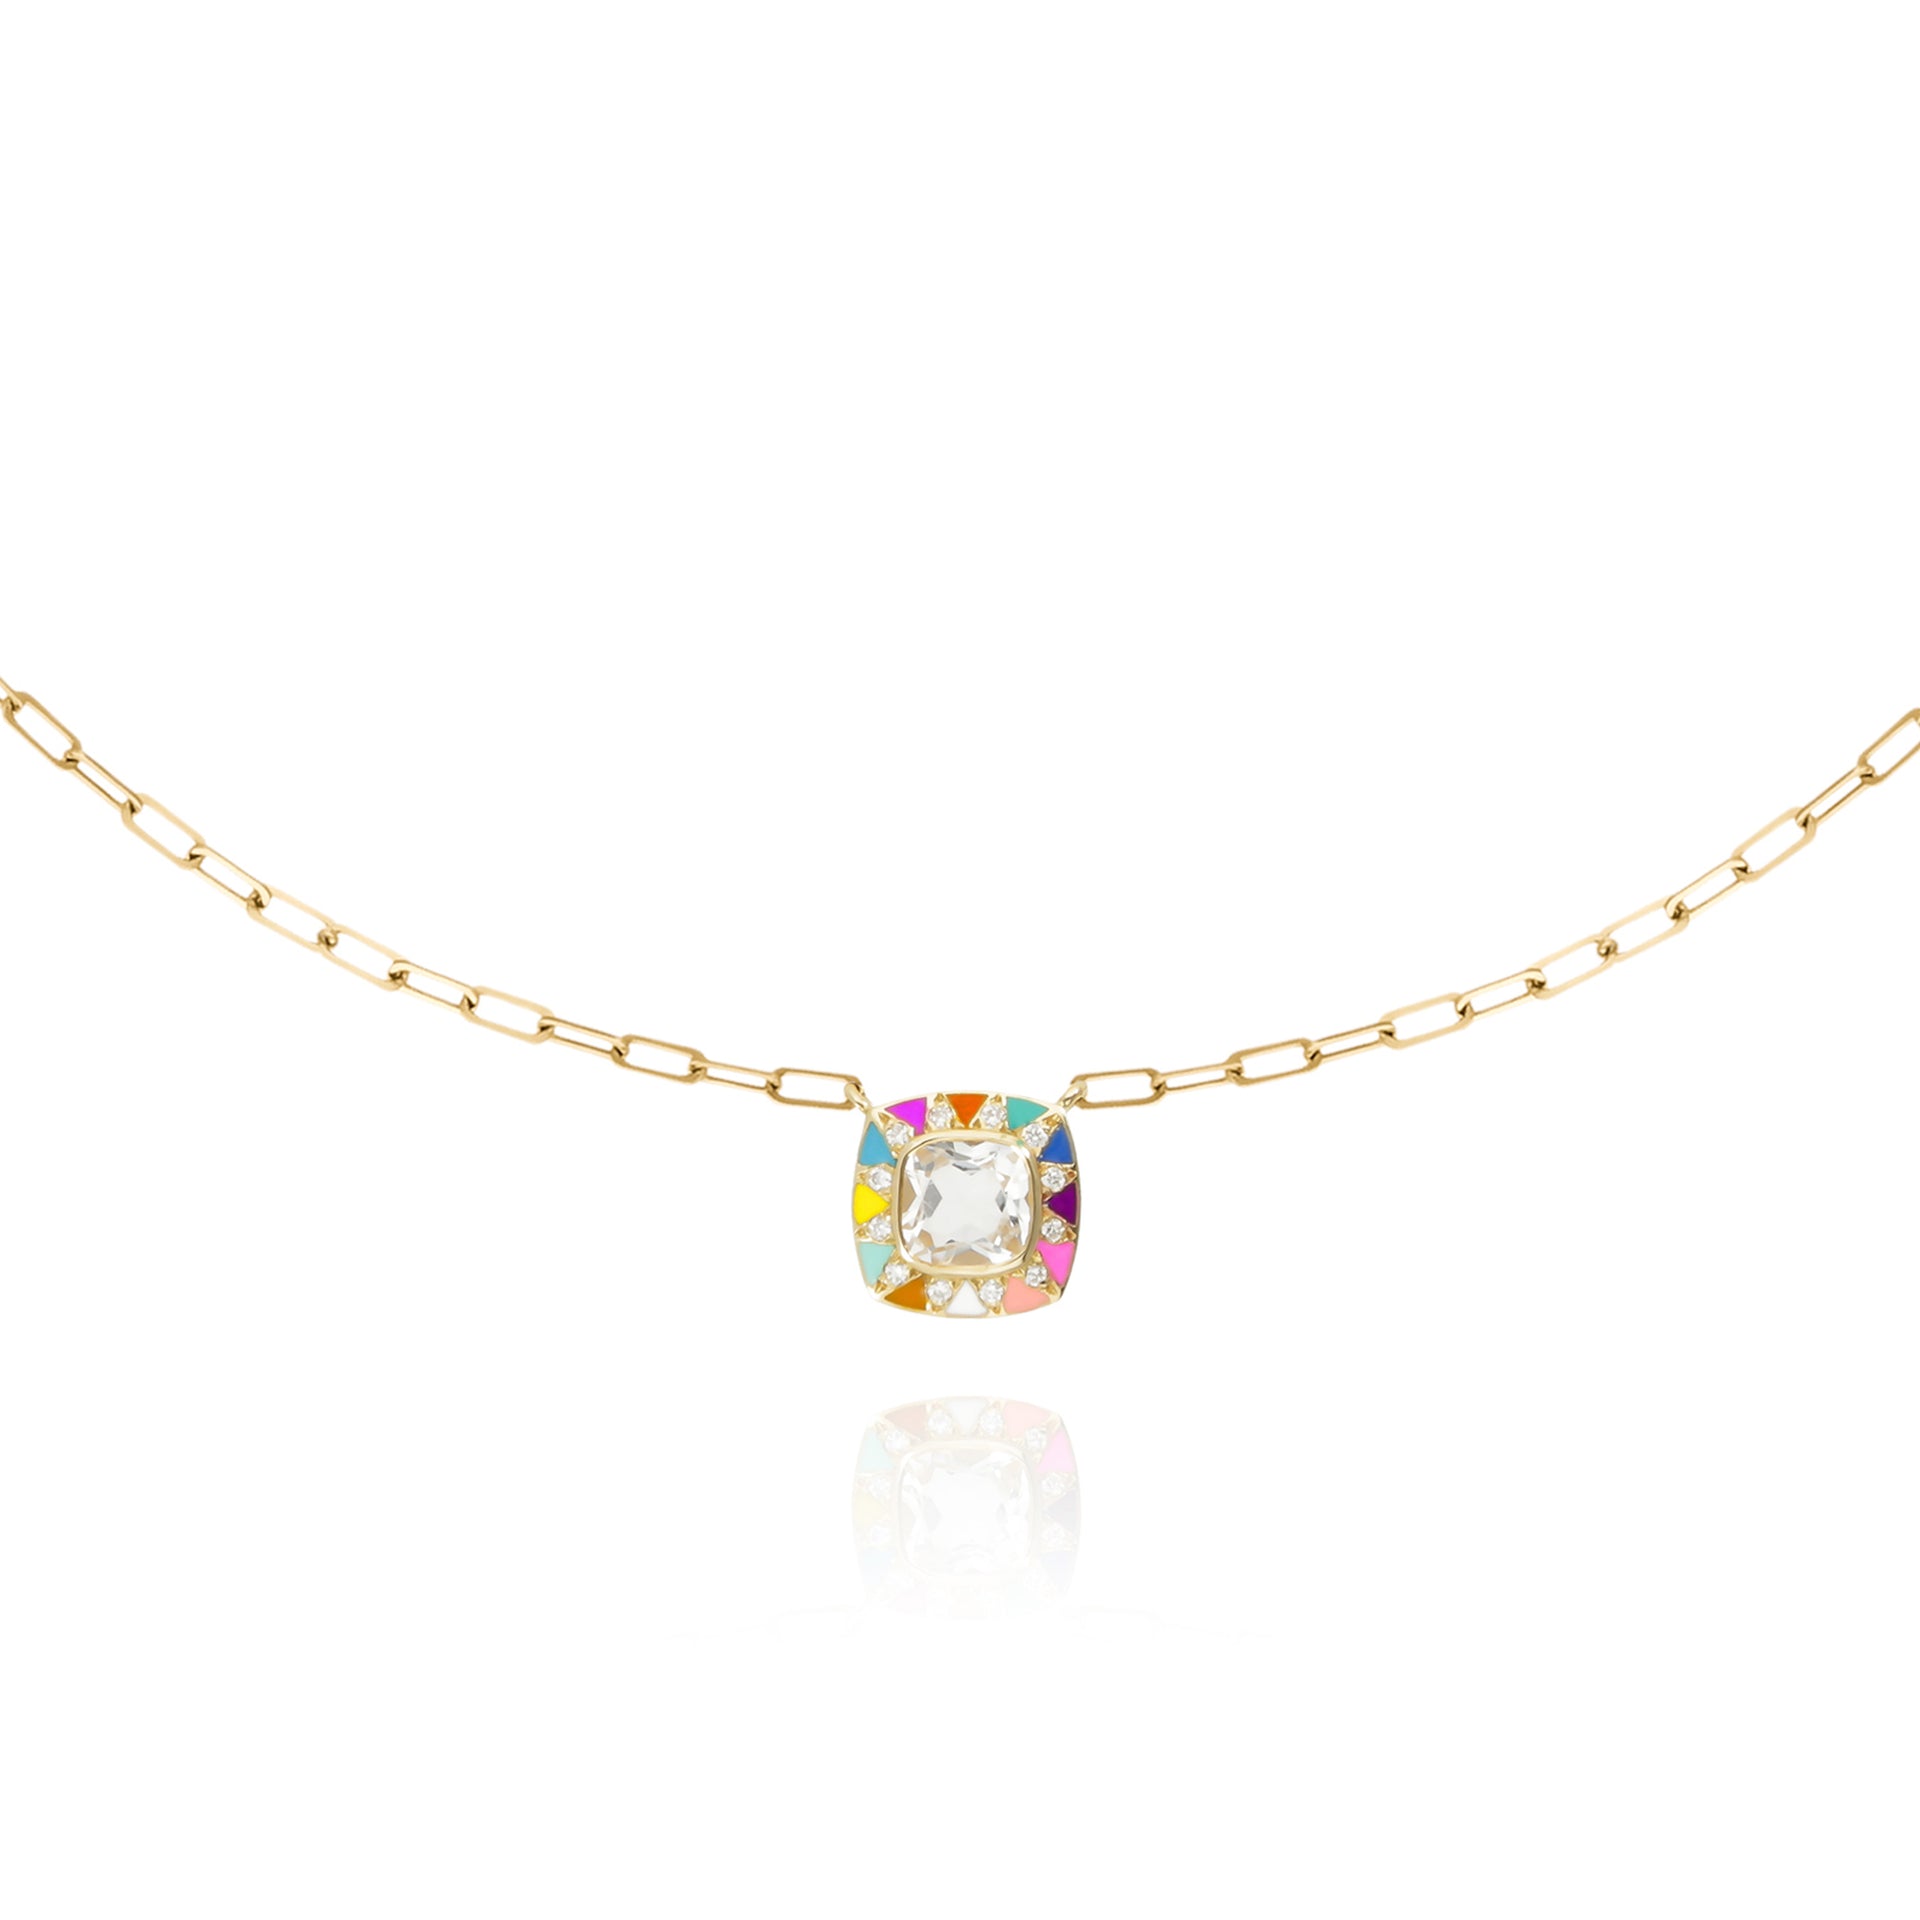 Stella Rainbow Chain and Diamond Necklace with Rock Crystal